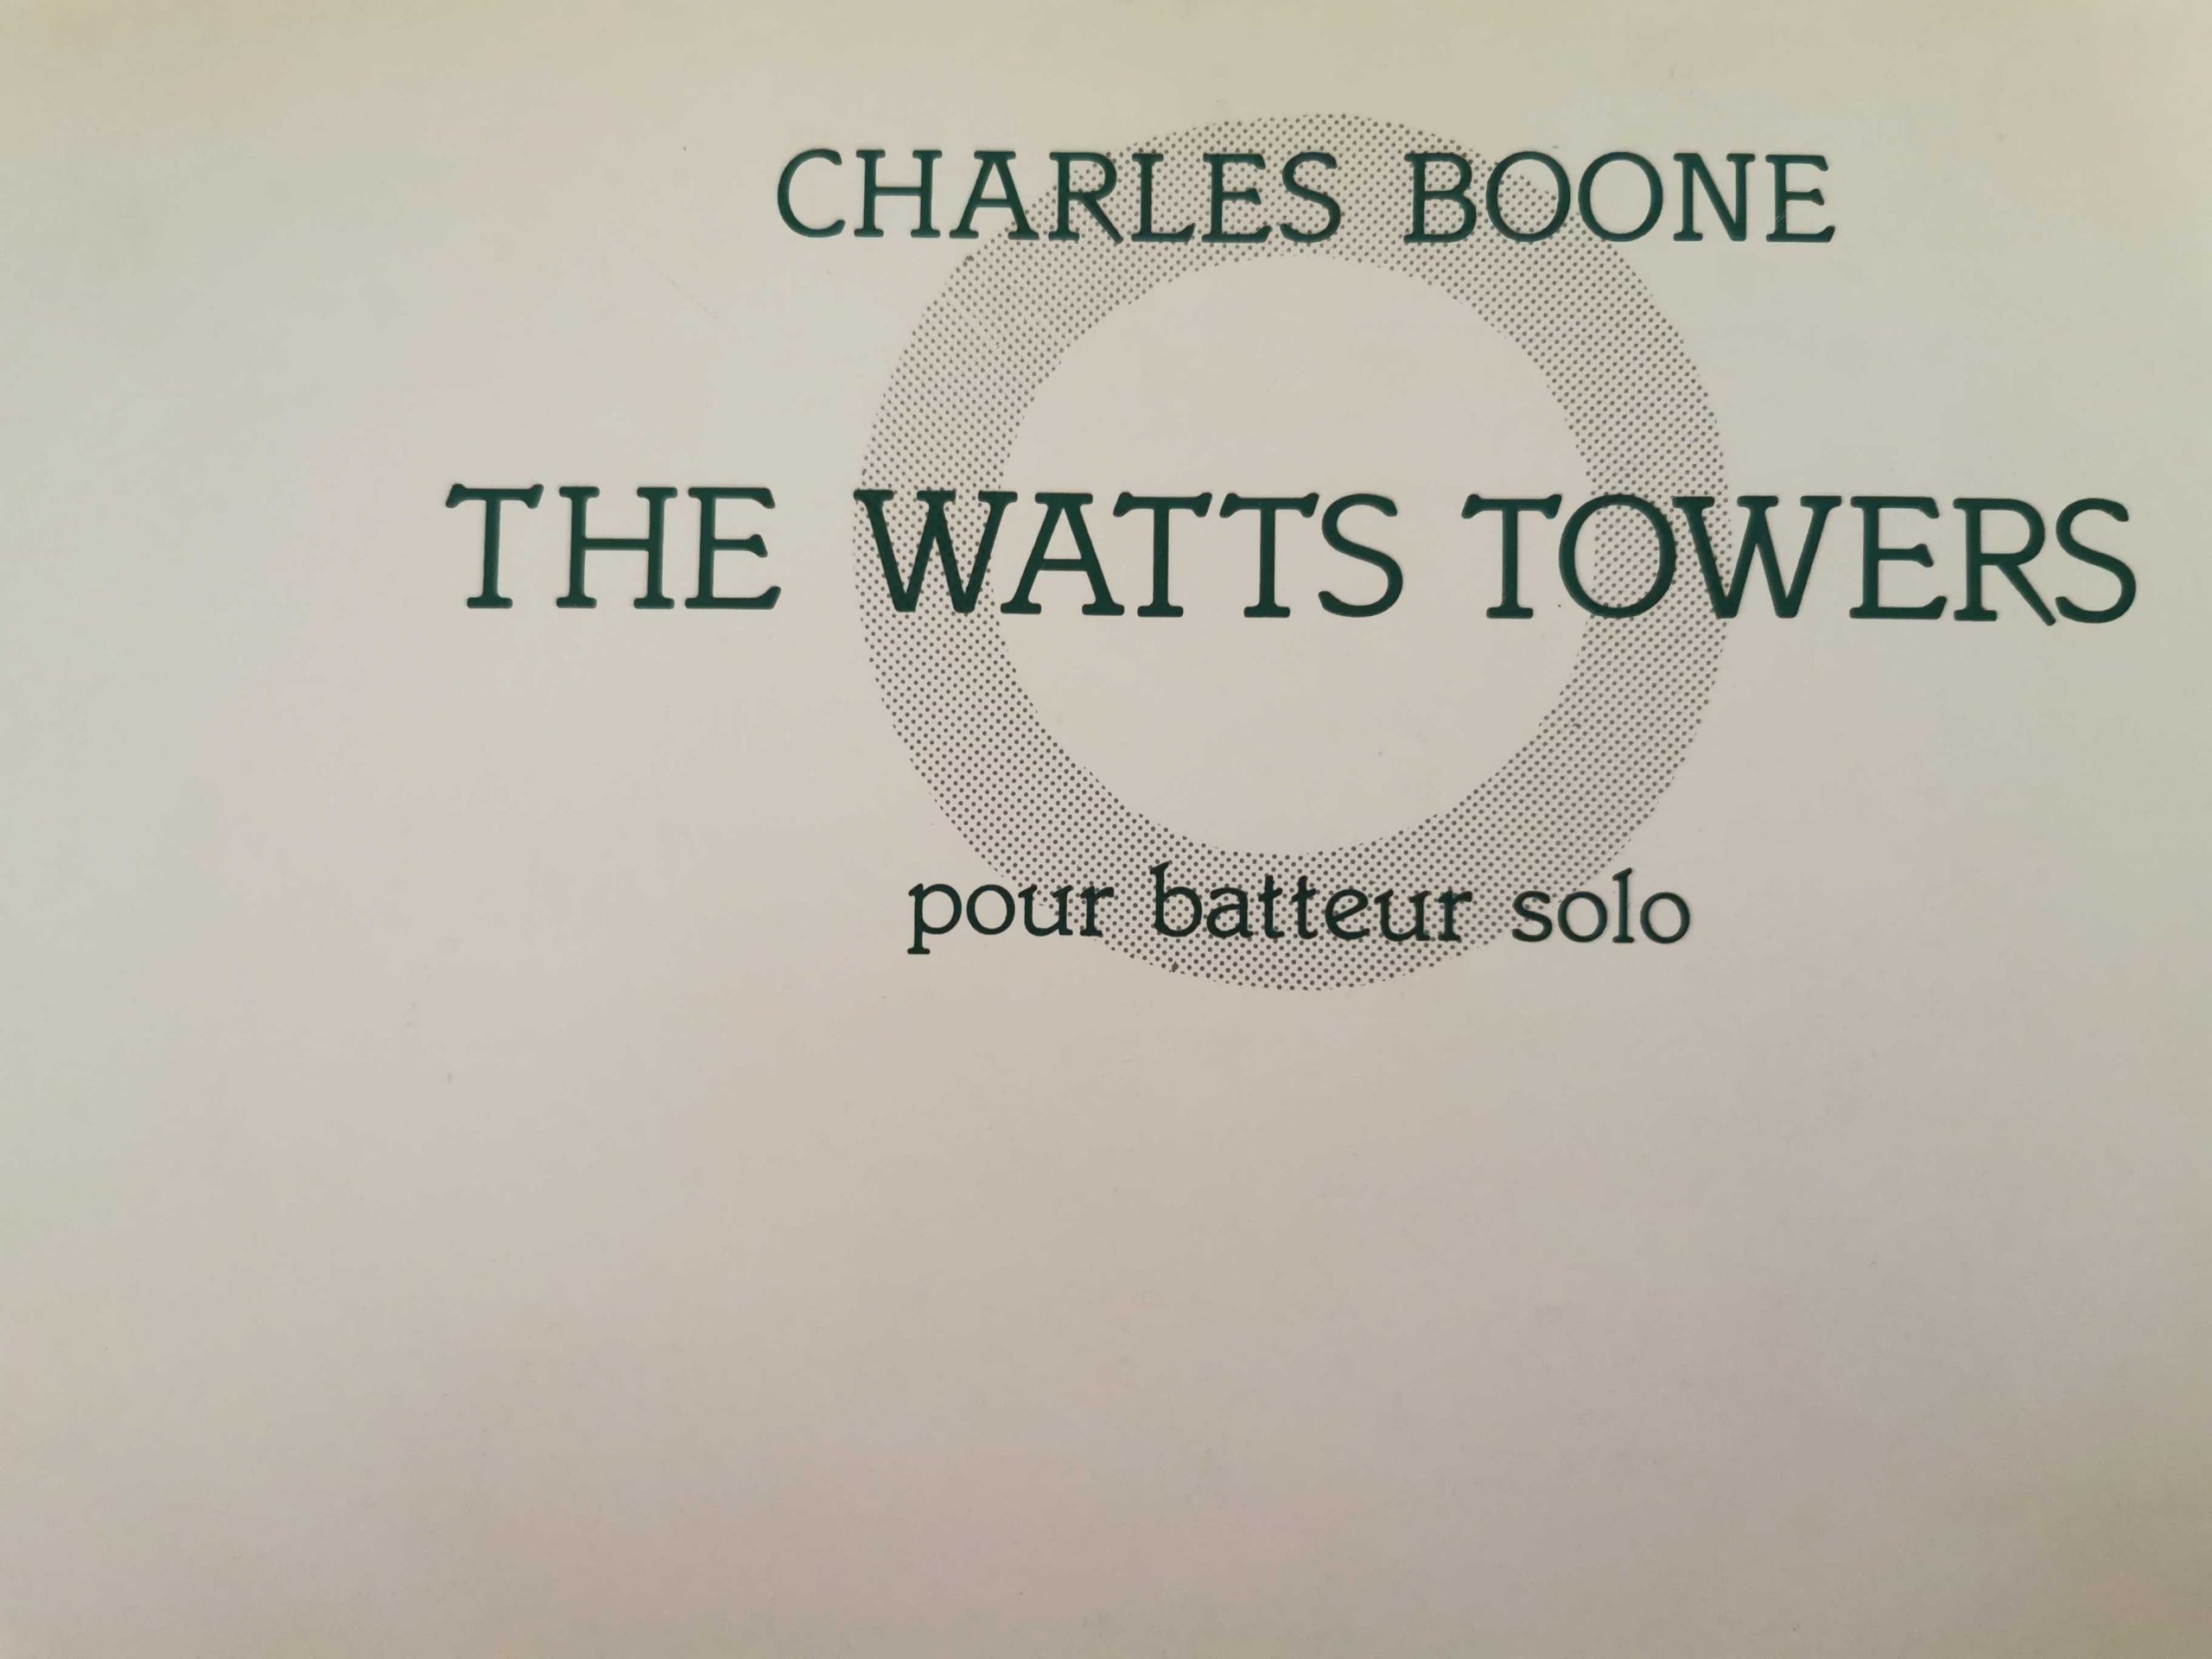 The Watts Towers by Charles Boone